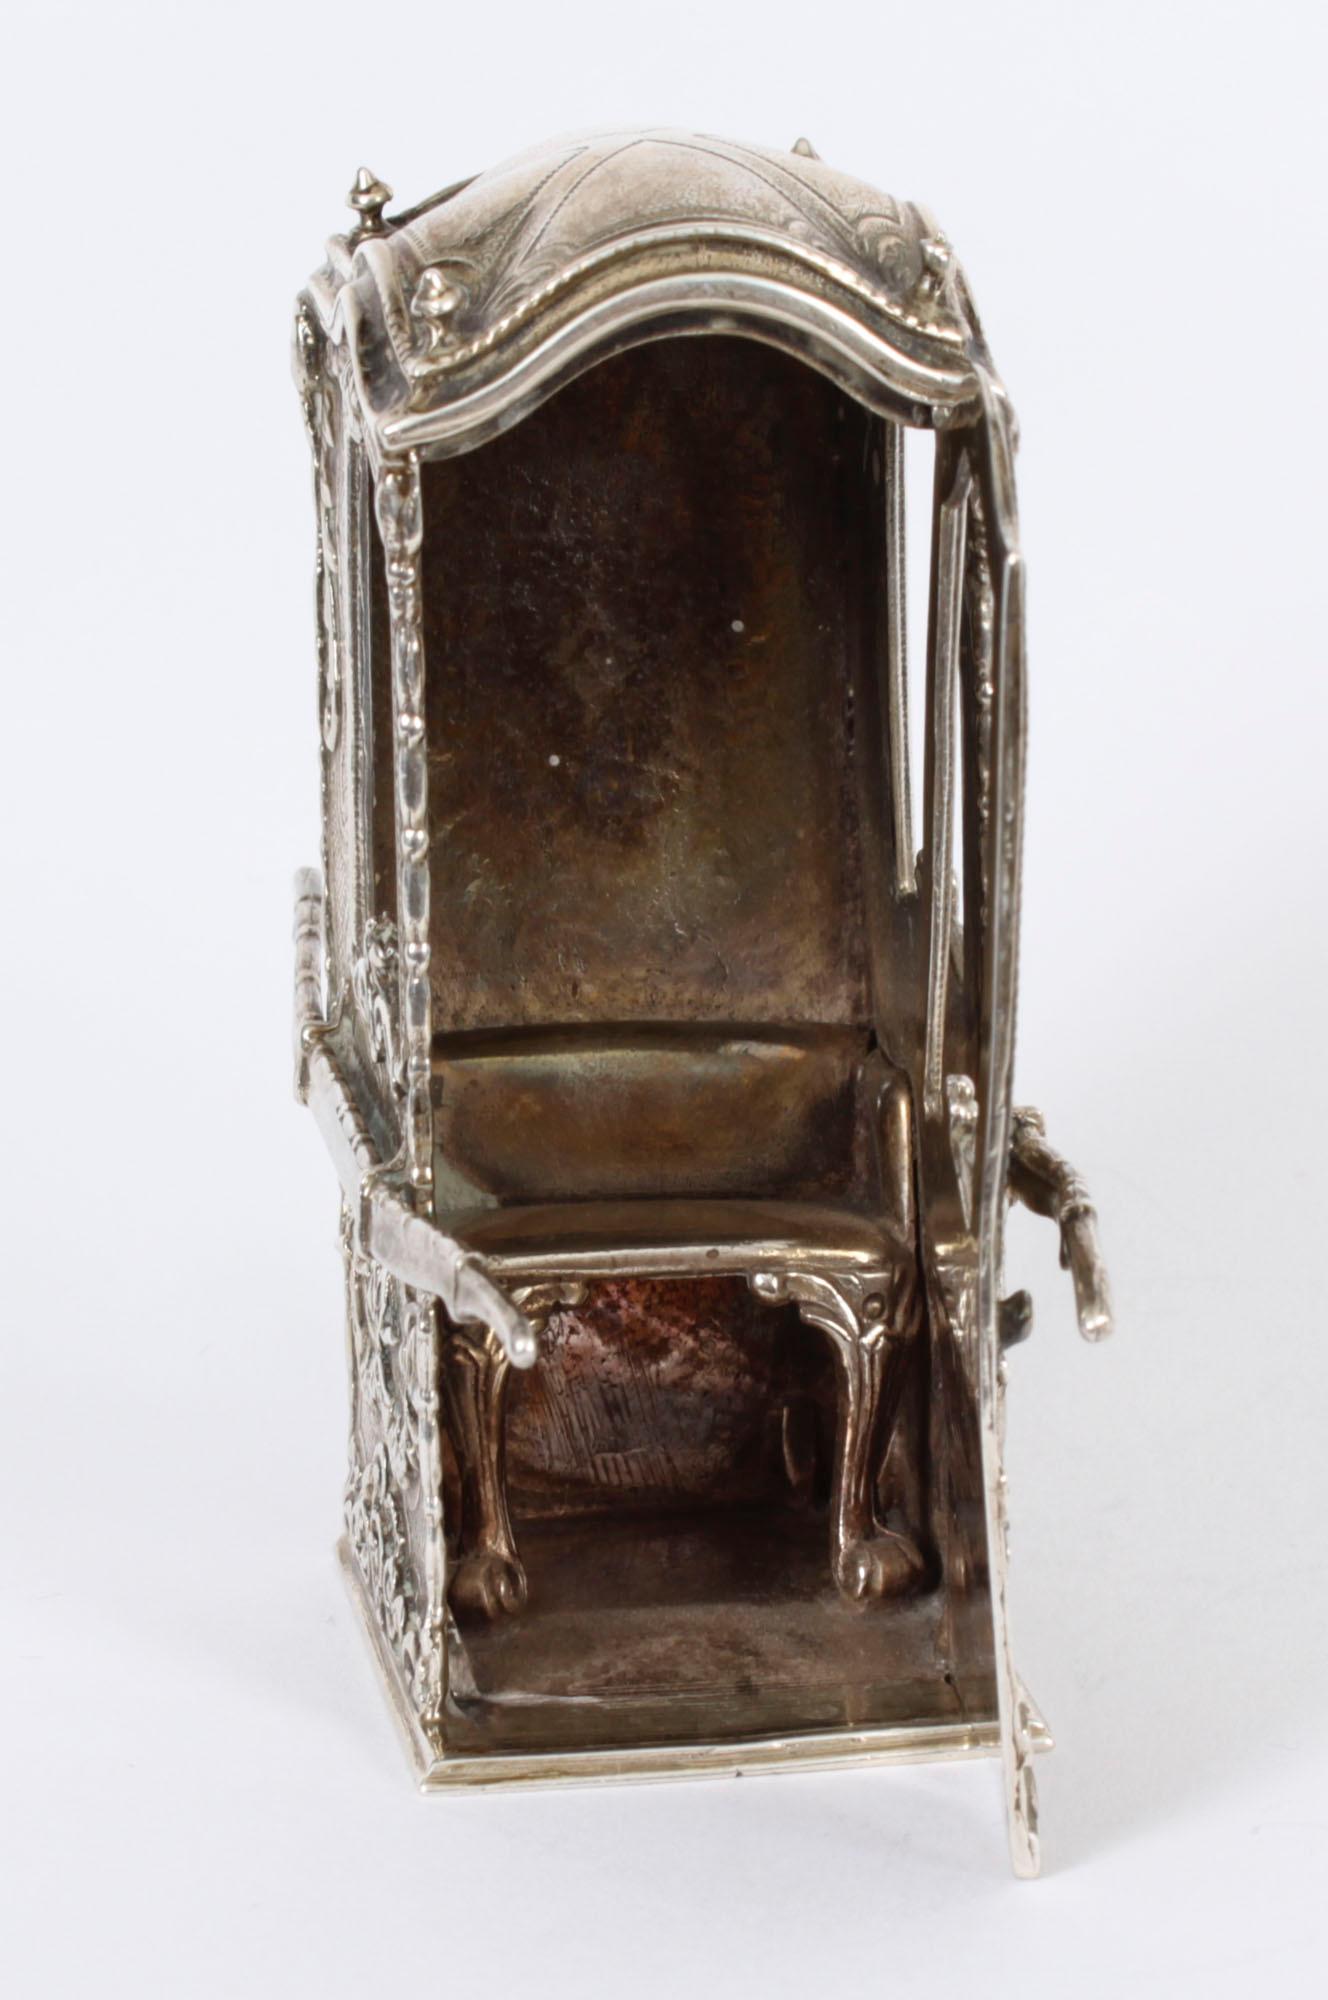 AntiqueFrench Silver Miniature Sedan Chair 19th Century For Sale 12